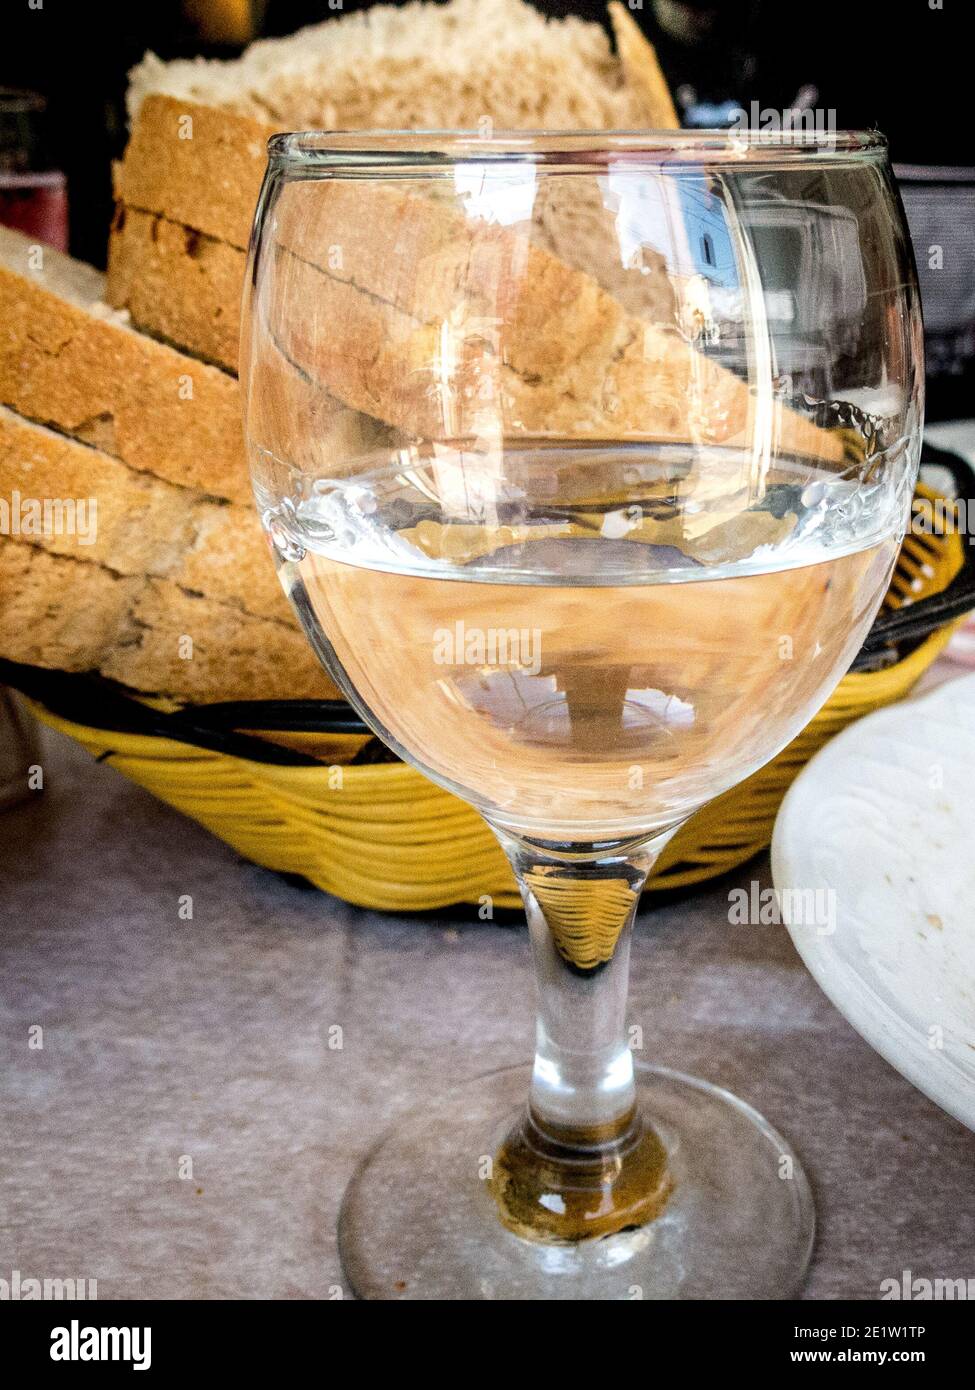 Albanian Raki, a clear alcohol distilled from different kinds of fruit, served in a wine glass with a side of fresh bread. Stock Photo